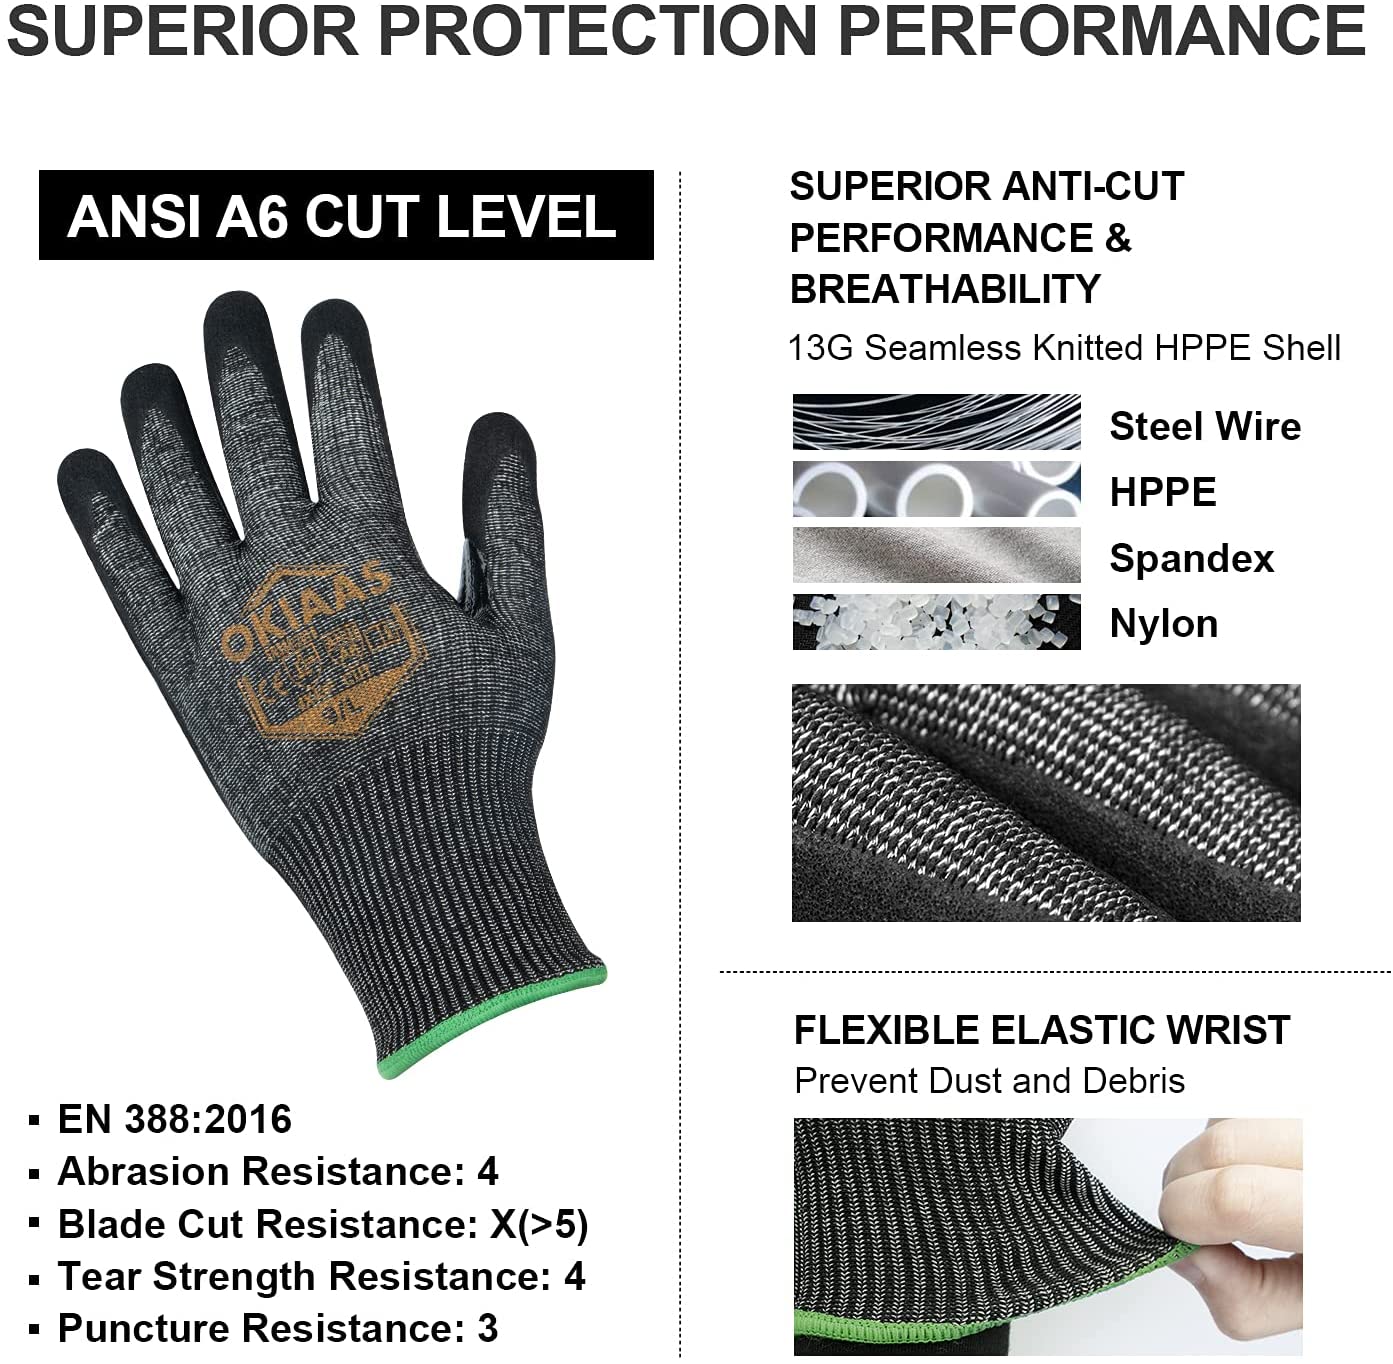 Cut Resistant Gloves, Level 6, Grey, Industry Grade Hand Protection.